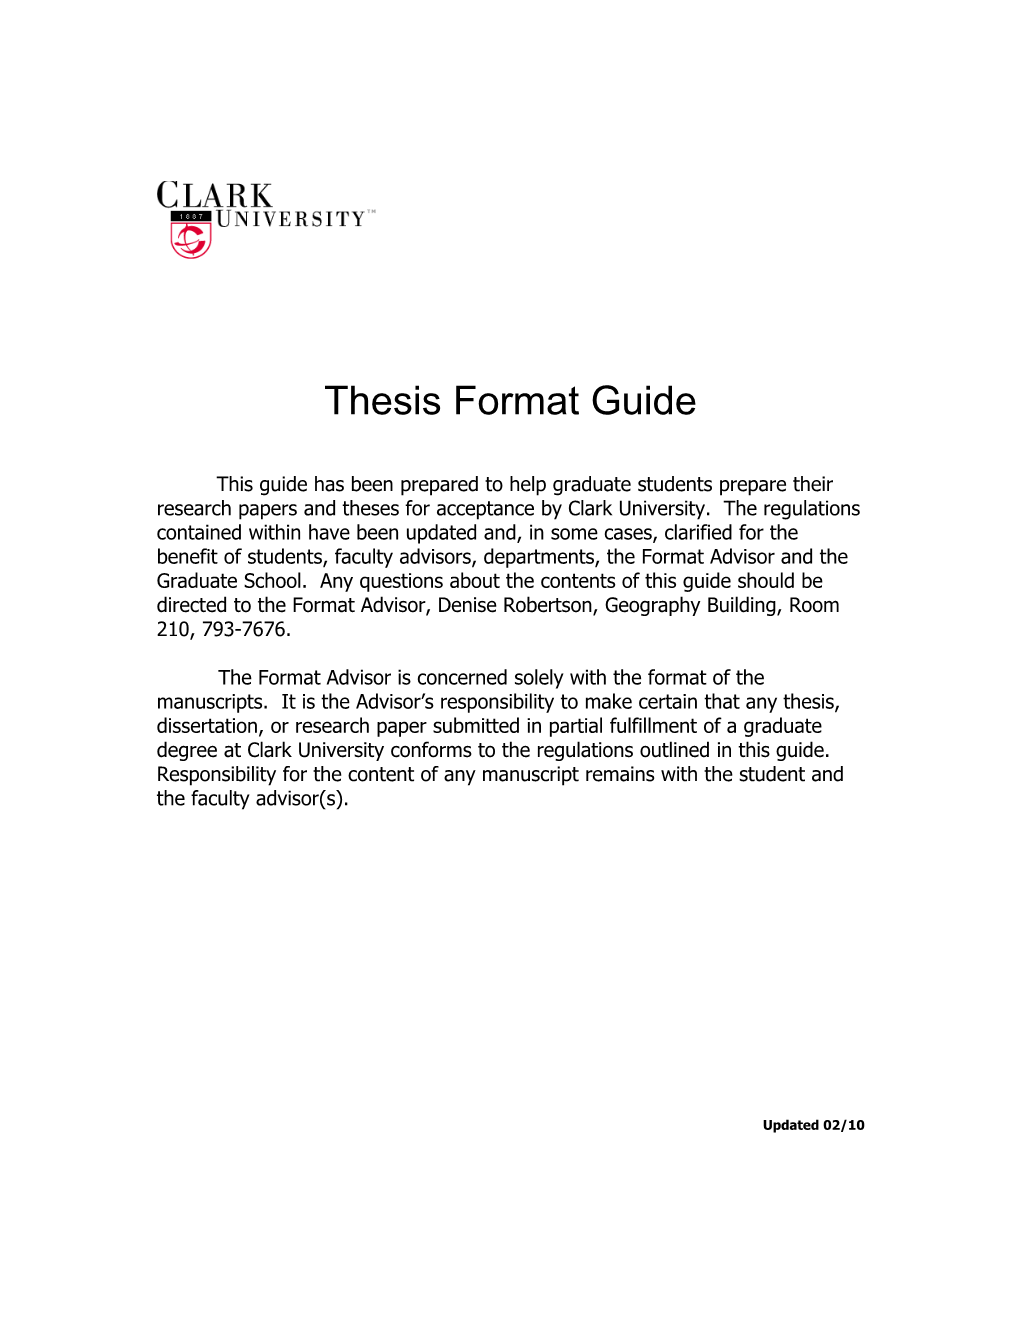 Guidelines for Submitting a Doctoral Dissertation